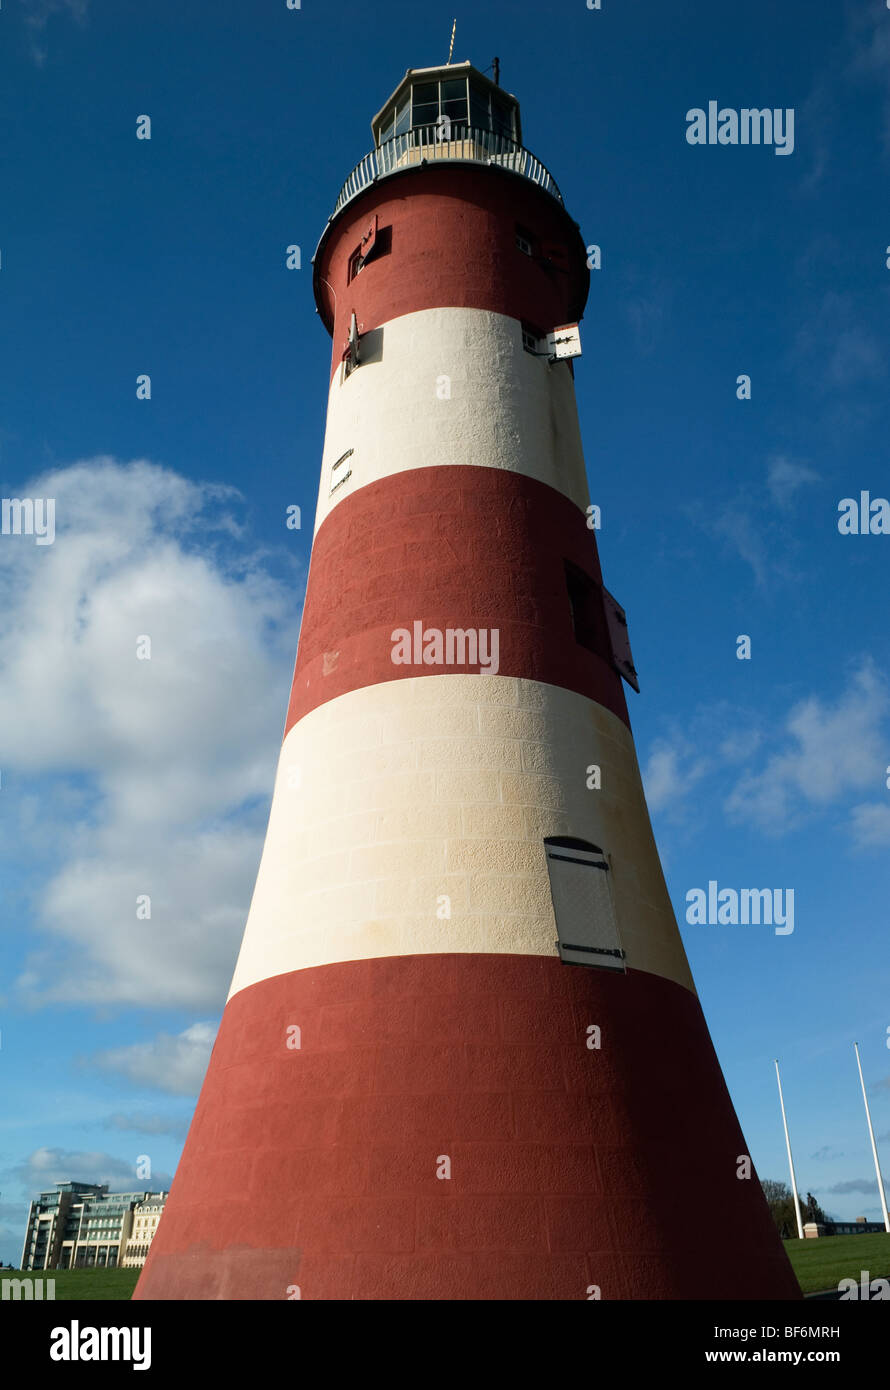 Smeaton's Tower, former lighthouse rebuilt on Plymouth Hoe, Devon UK Stock Photo